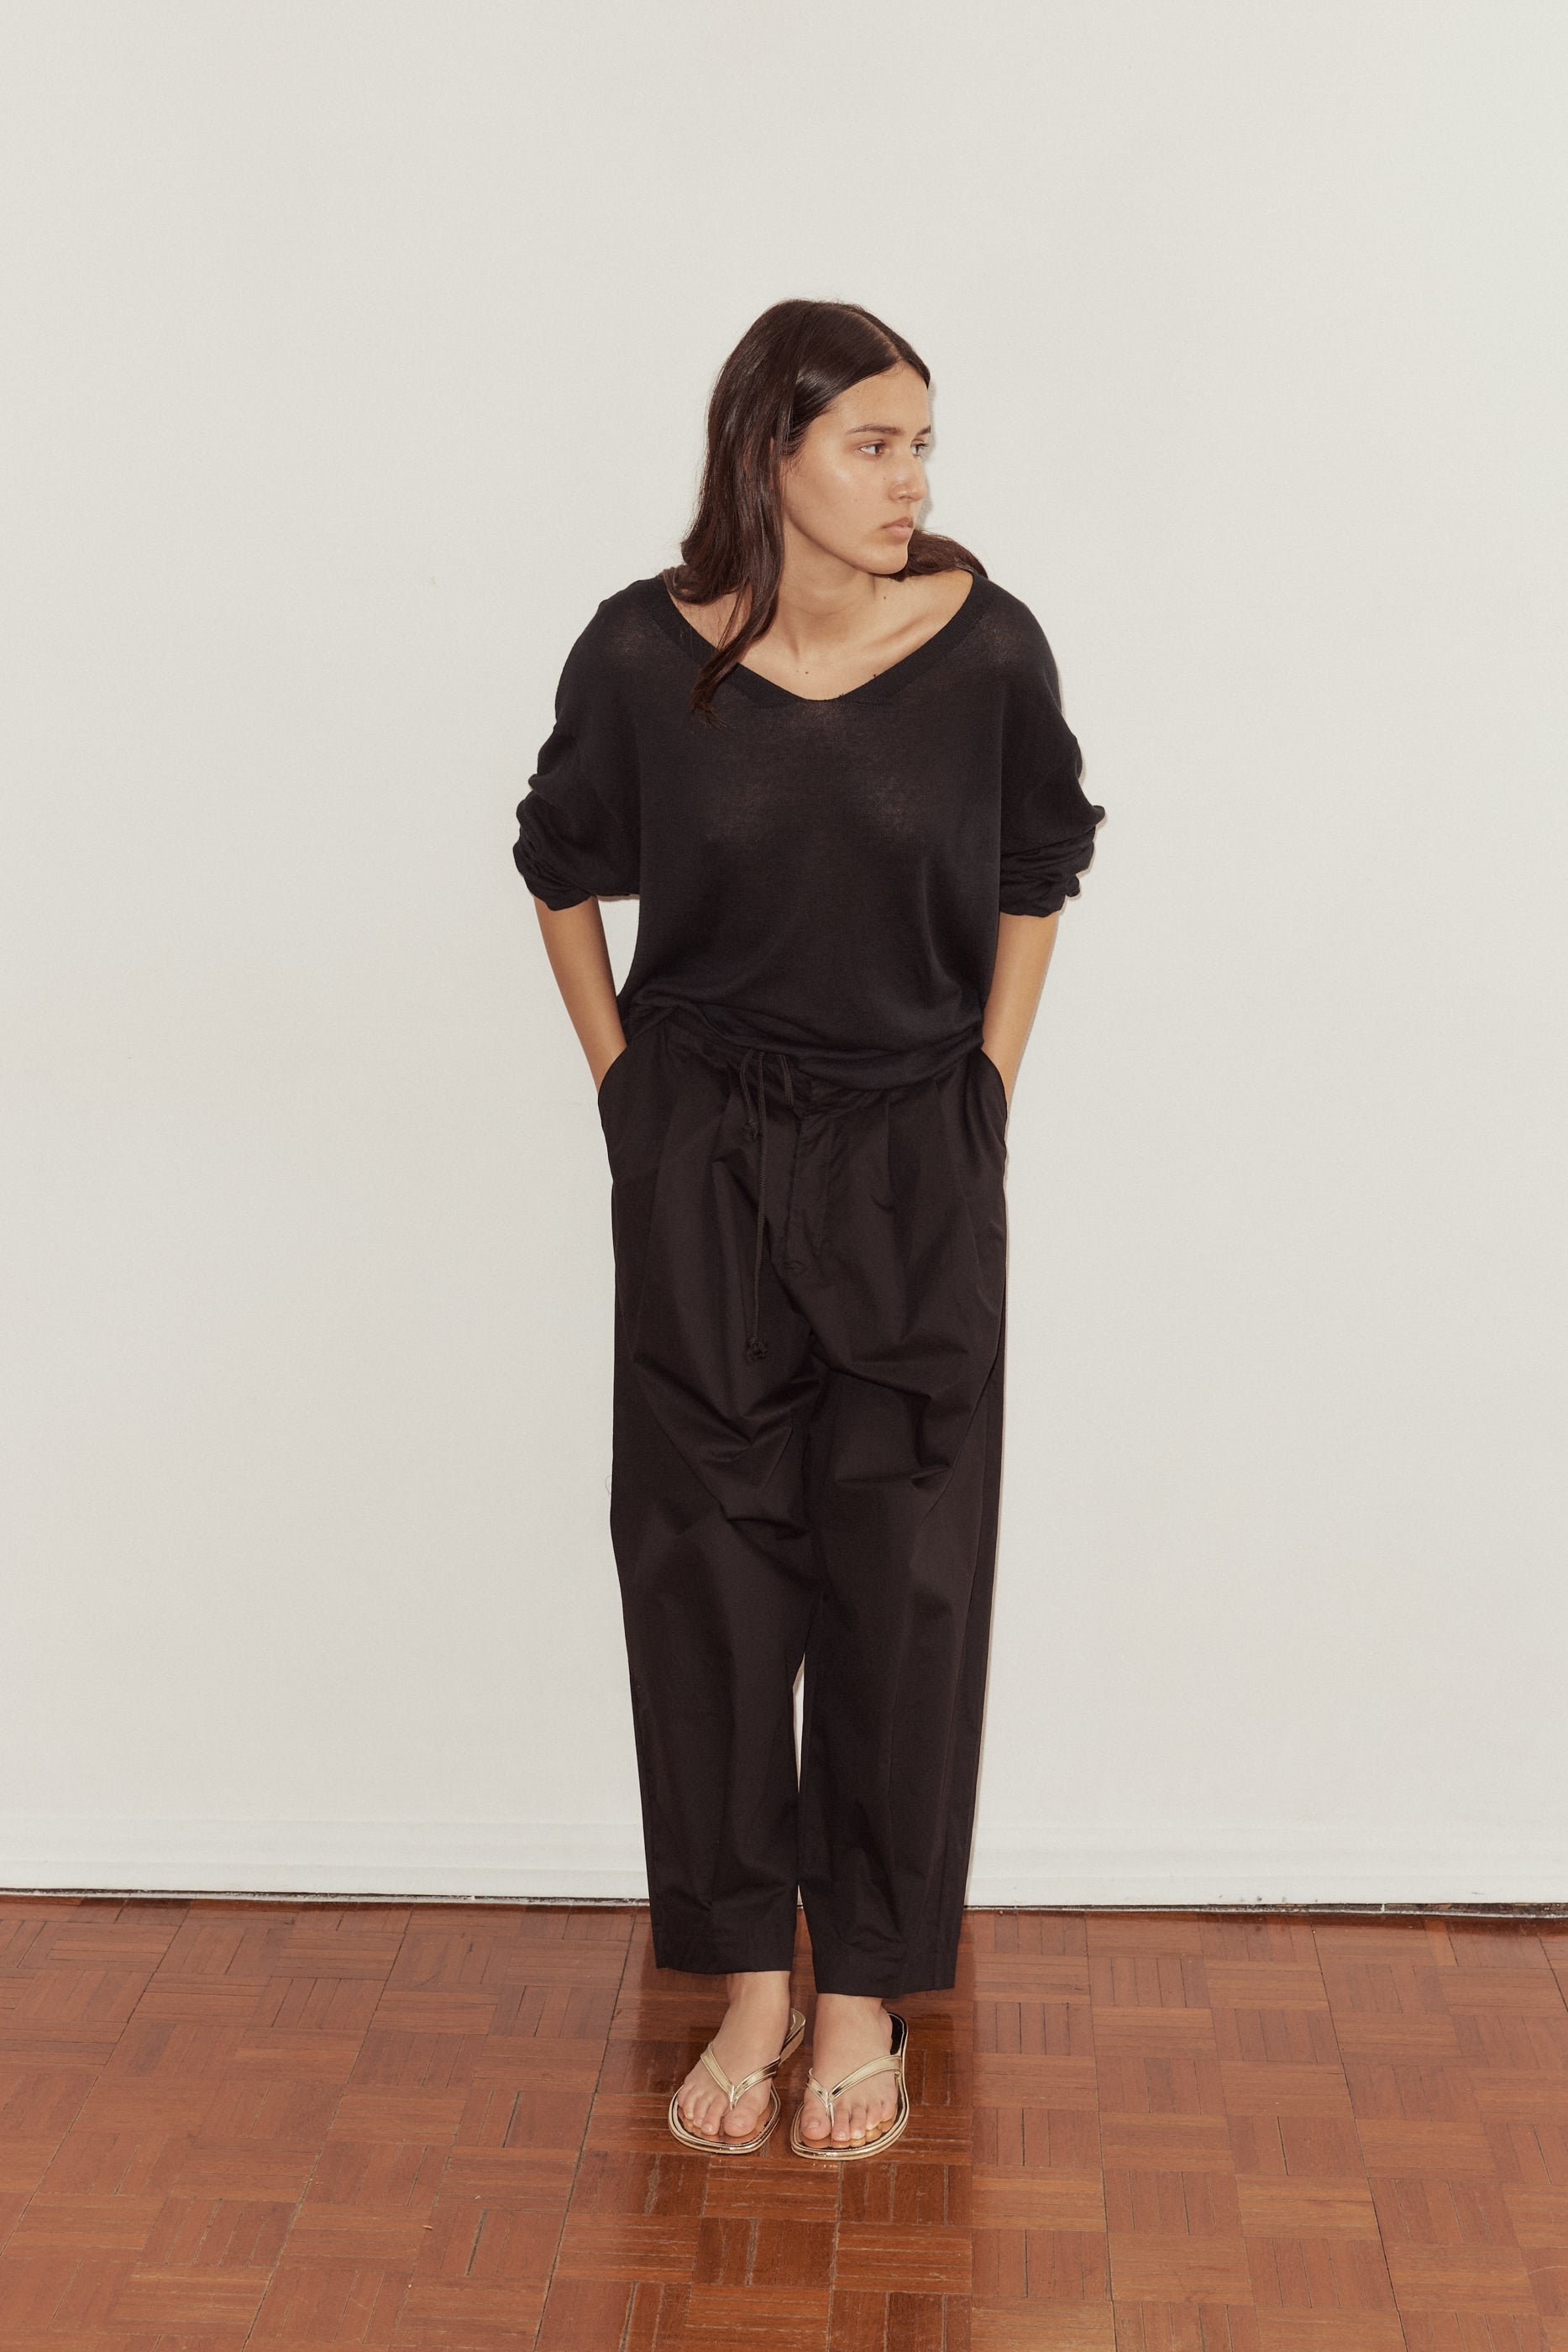 female model puts hands in pockets of the Deiji Studios Cotton Pant in black, a tailored trouser style pant with a relaxed leg. Styled with the Deiji Studios loose long sleeve knitted top in black.